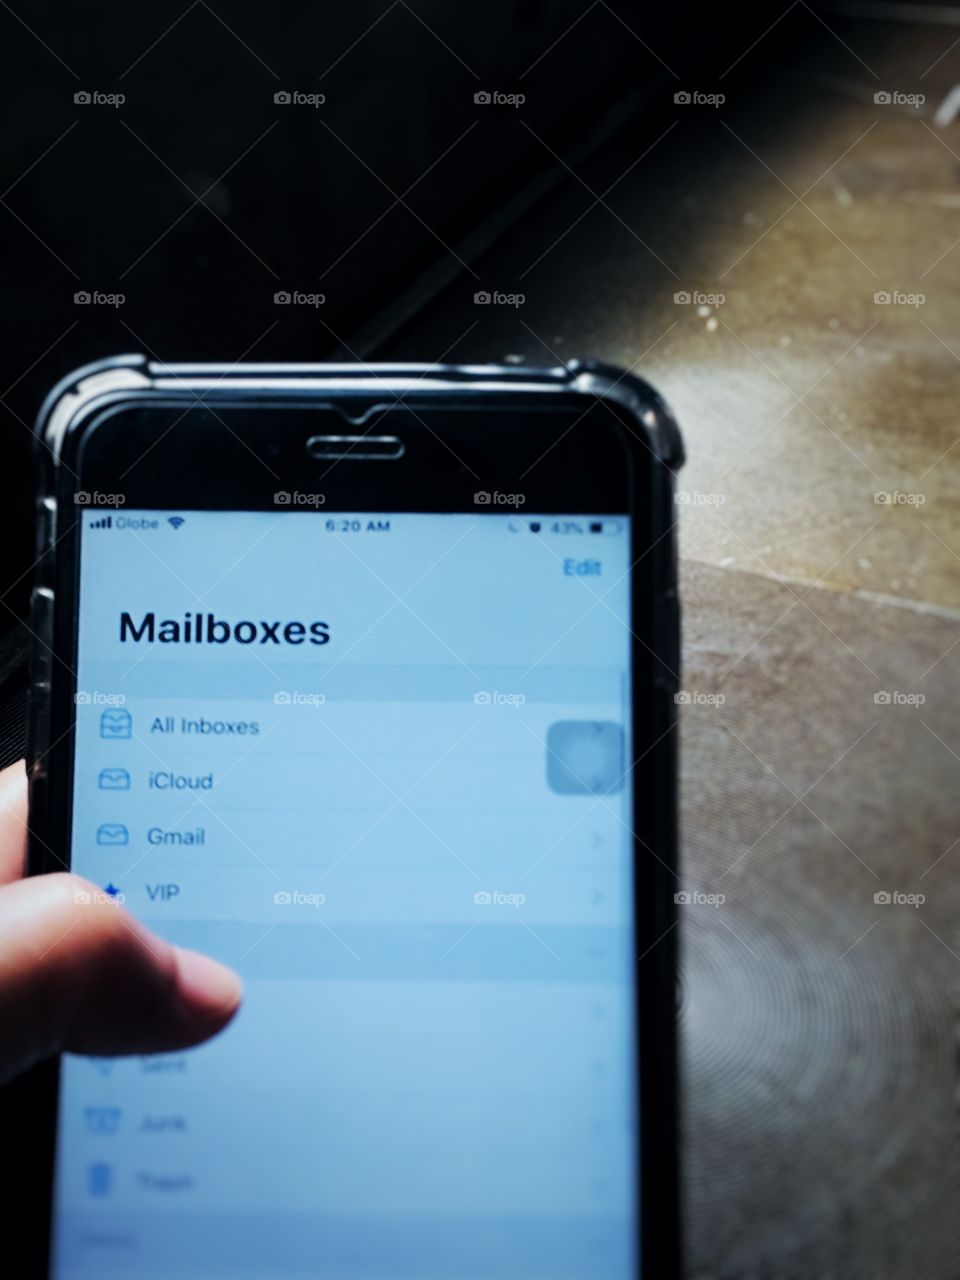 mailboxes, inbox, emails